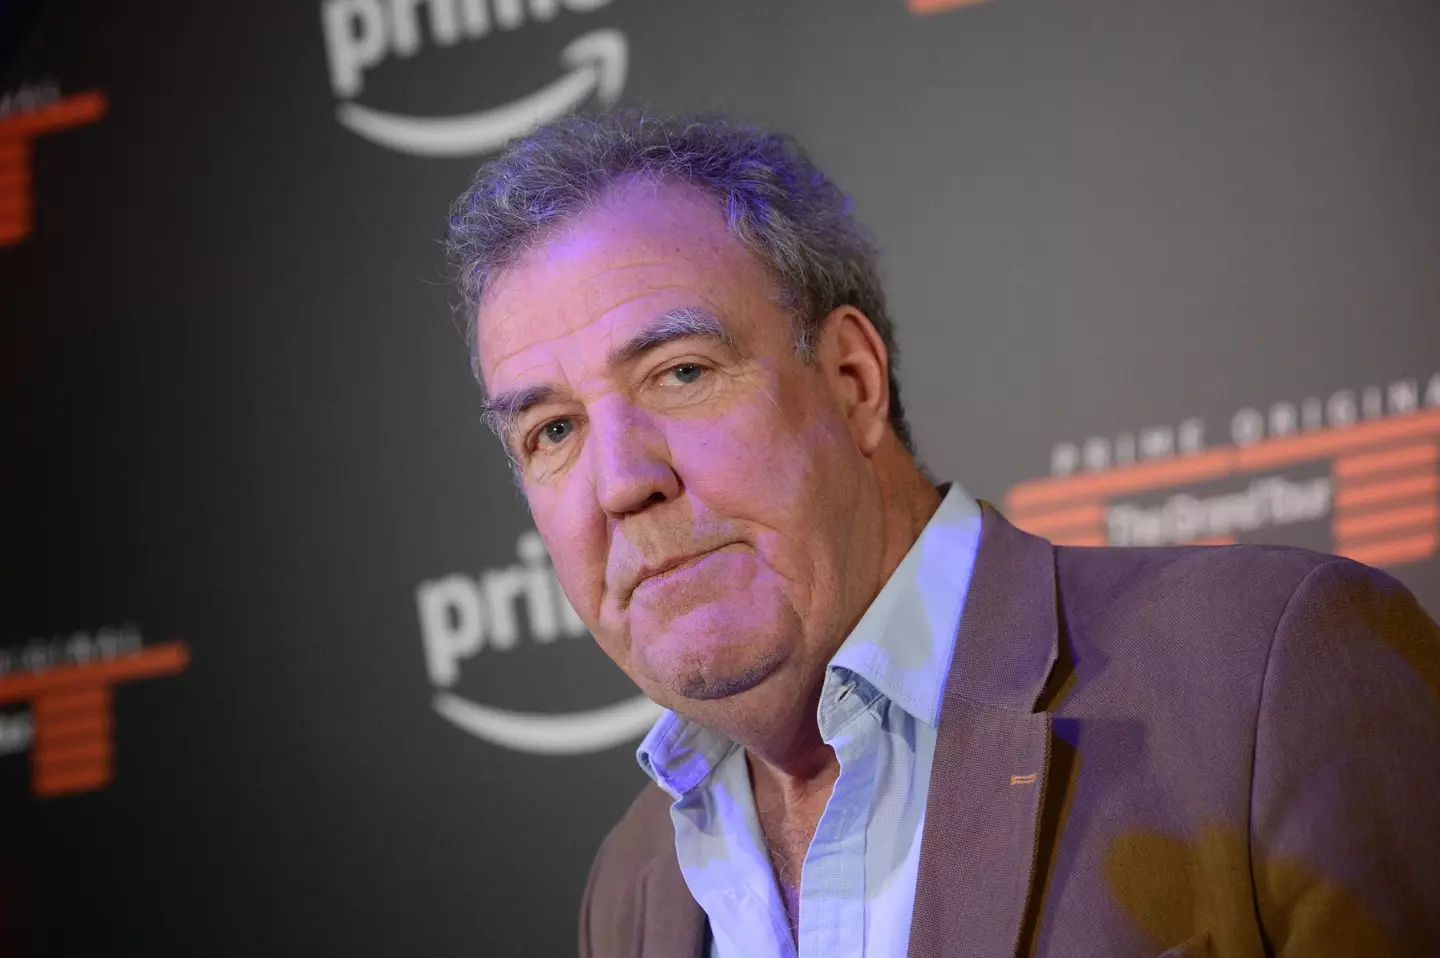 Jeremy Clarkson says that he's emailed Prince Harry and Meghan Markle after his controversial column in The Sun.